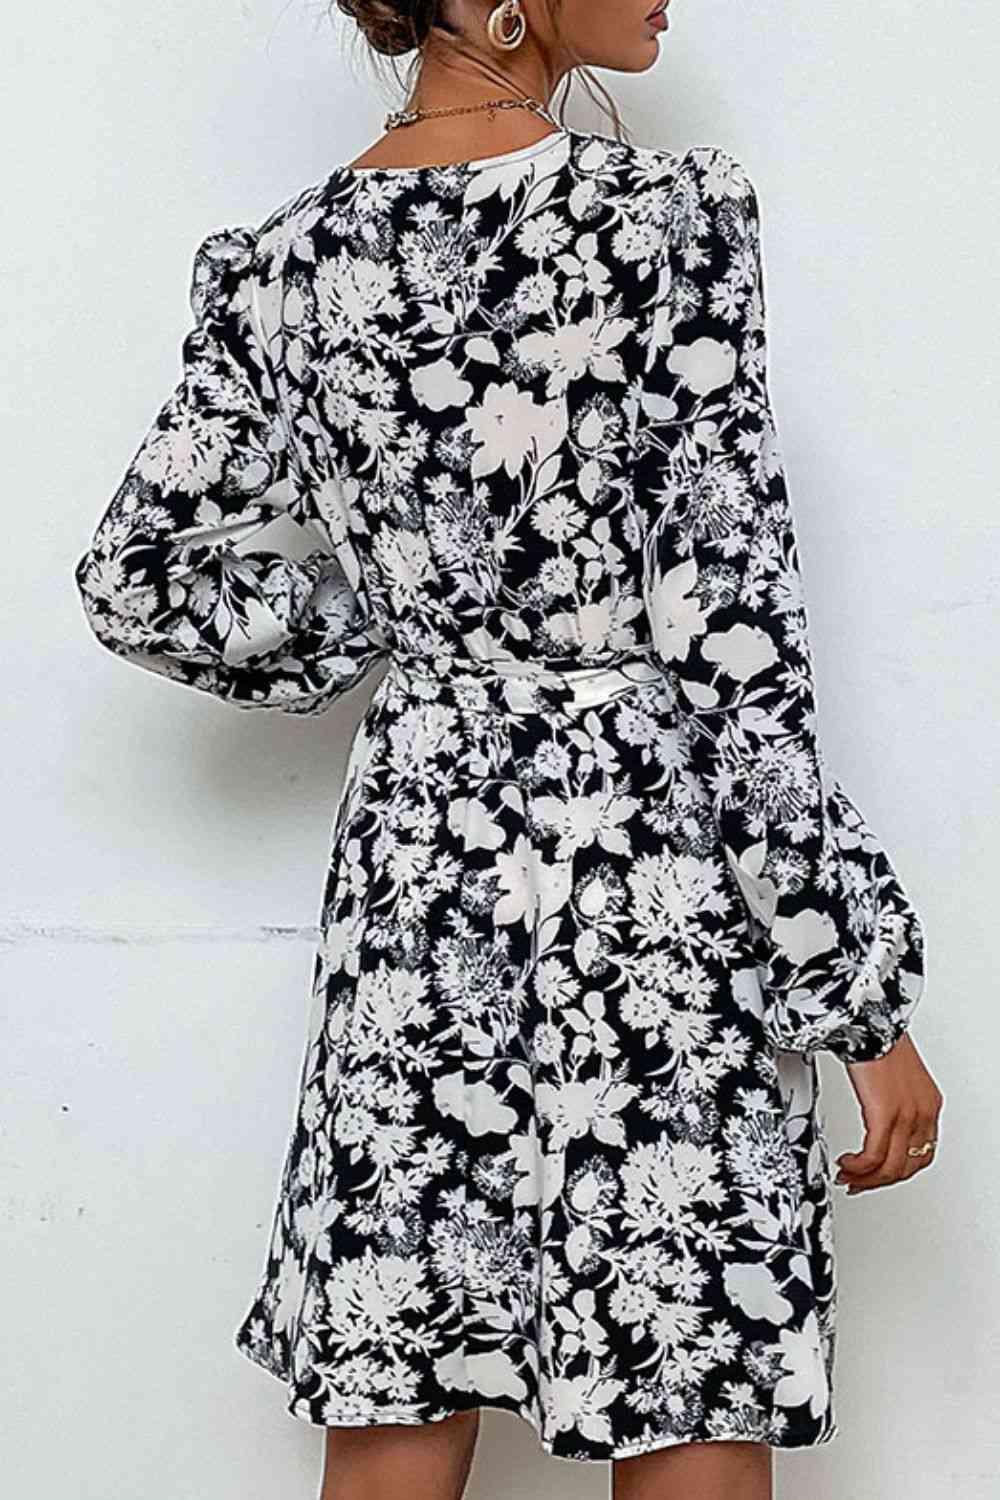 a woman wearing a black and white floral print dress